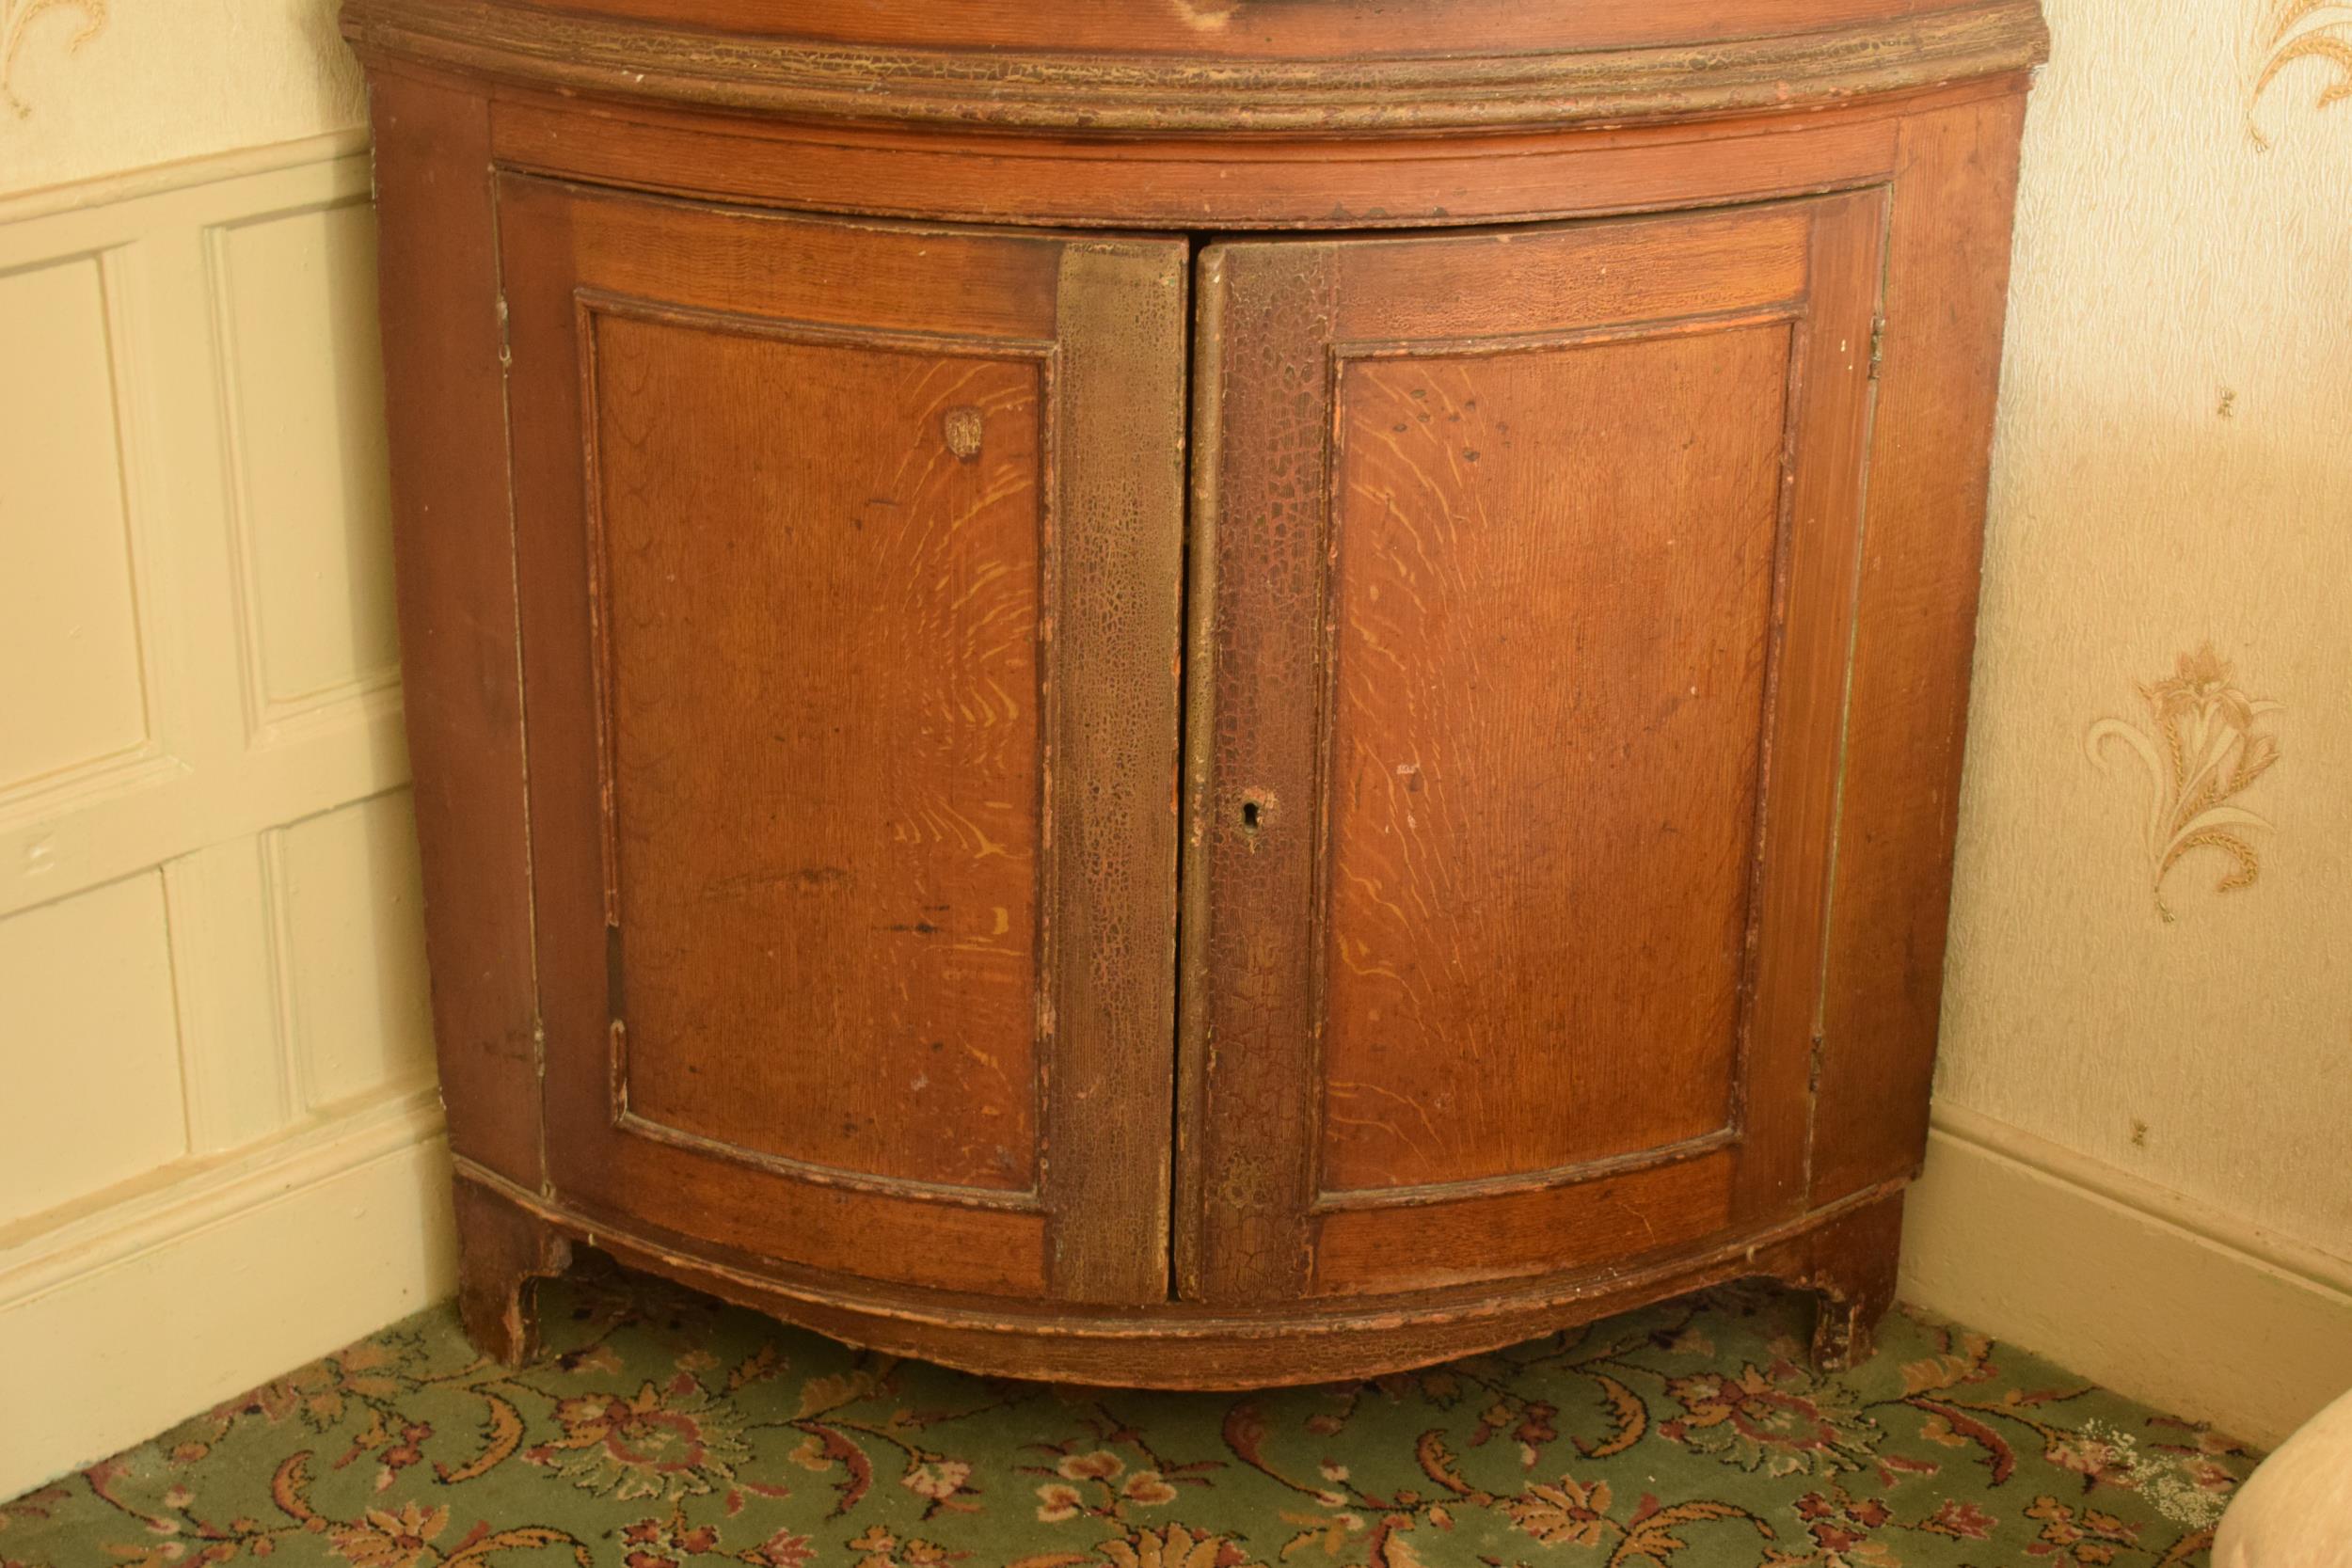 19th century freestanding double corner cupboard In good functional condition with some signs of - Image 5 of 16